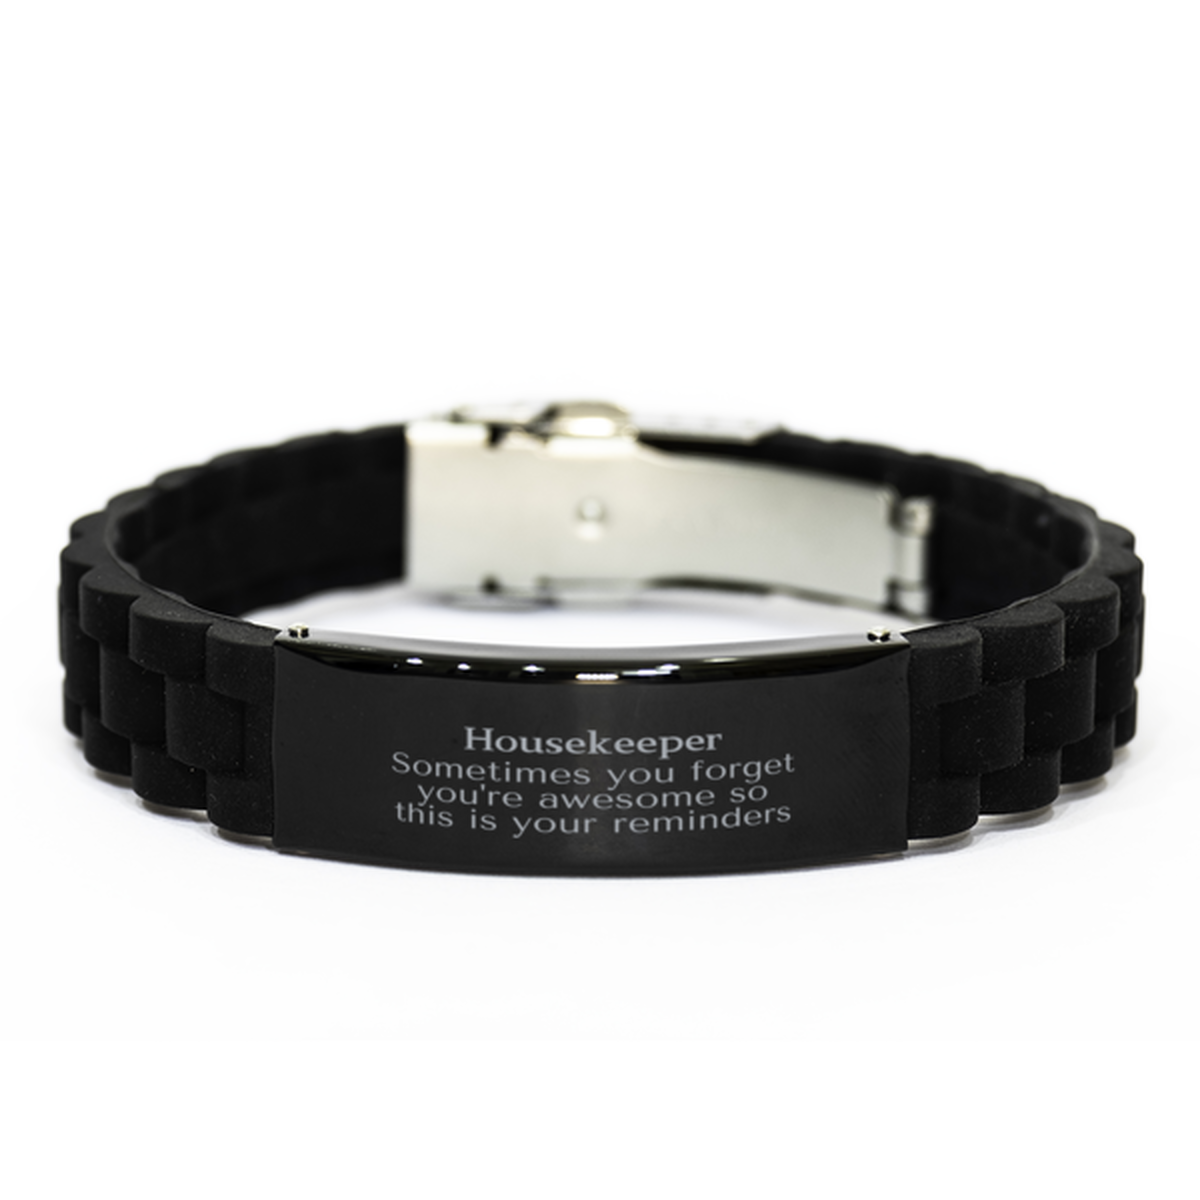 Sentimental Housekeeper Black Glidelock Clasp Bracelet, Housekeeper Sometimes you forget you're awesome so this is your reminders, Graduation Christmas Birthday Gifts for Housekeeper, Men, Women, Coworkers